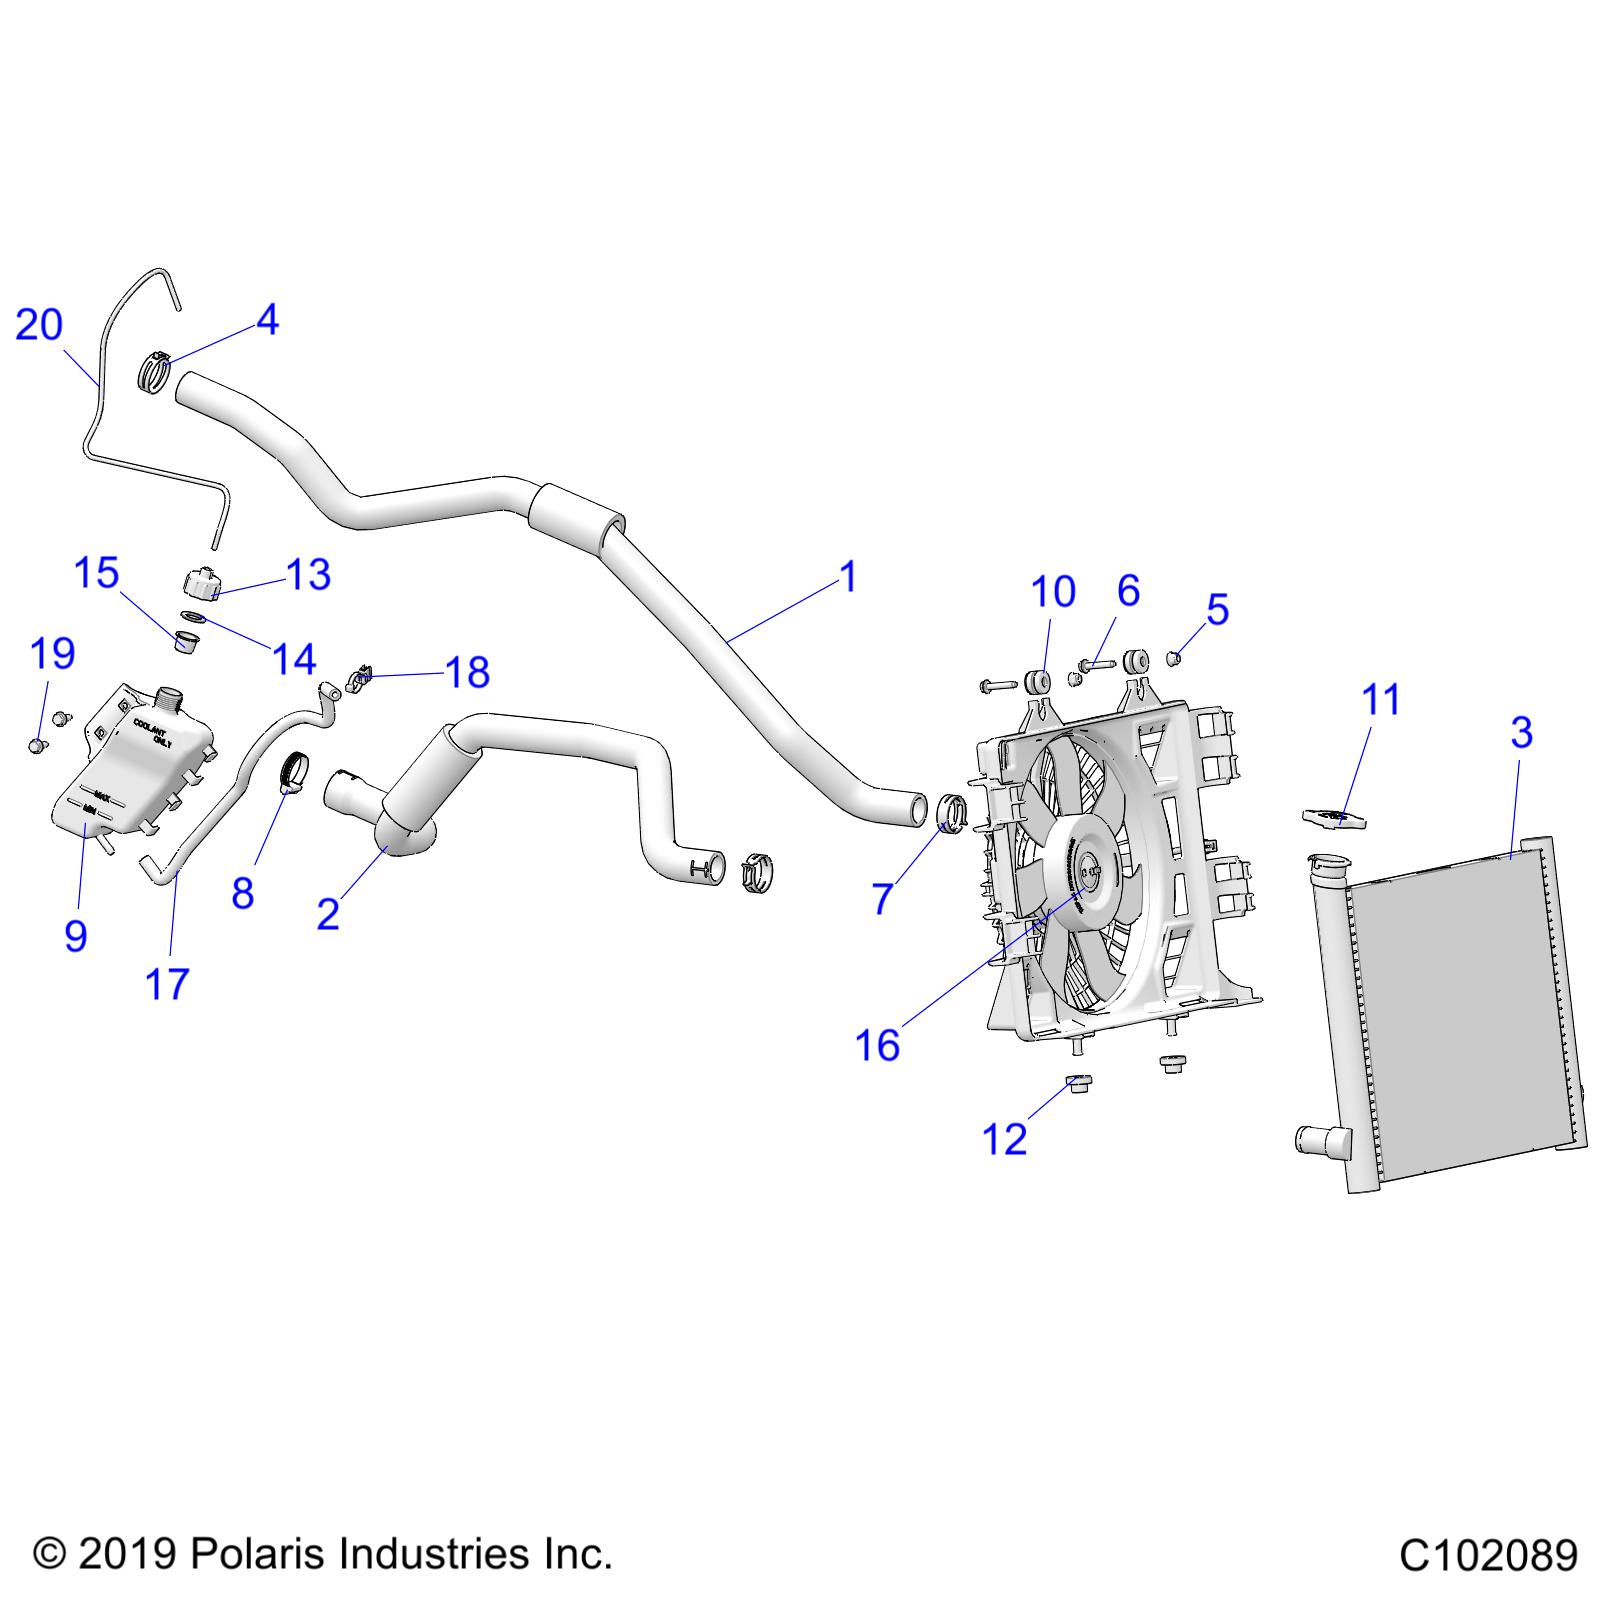 Part Number : 1244737 ASM-COOLANT SUPPLY